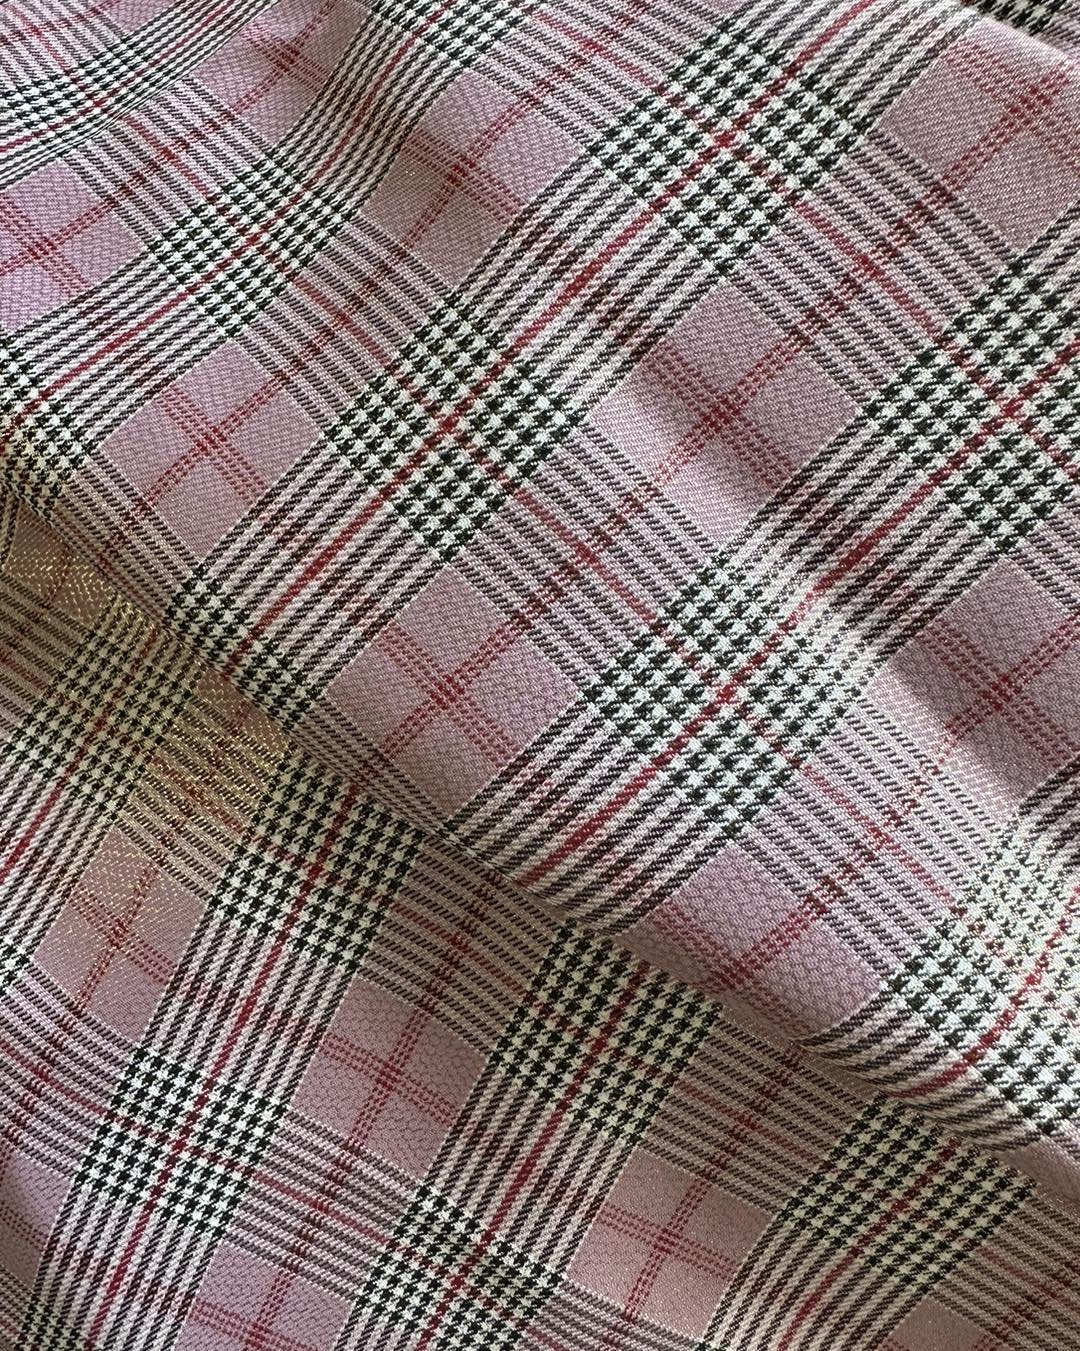 Ready to wear, in the making with this blend of timeless, elegance, delicate beauty and shimmering print.

#readytowear #winter #fotf #houndstooth #classic style #prettyinpink #print #pastel